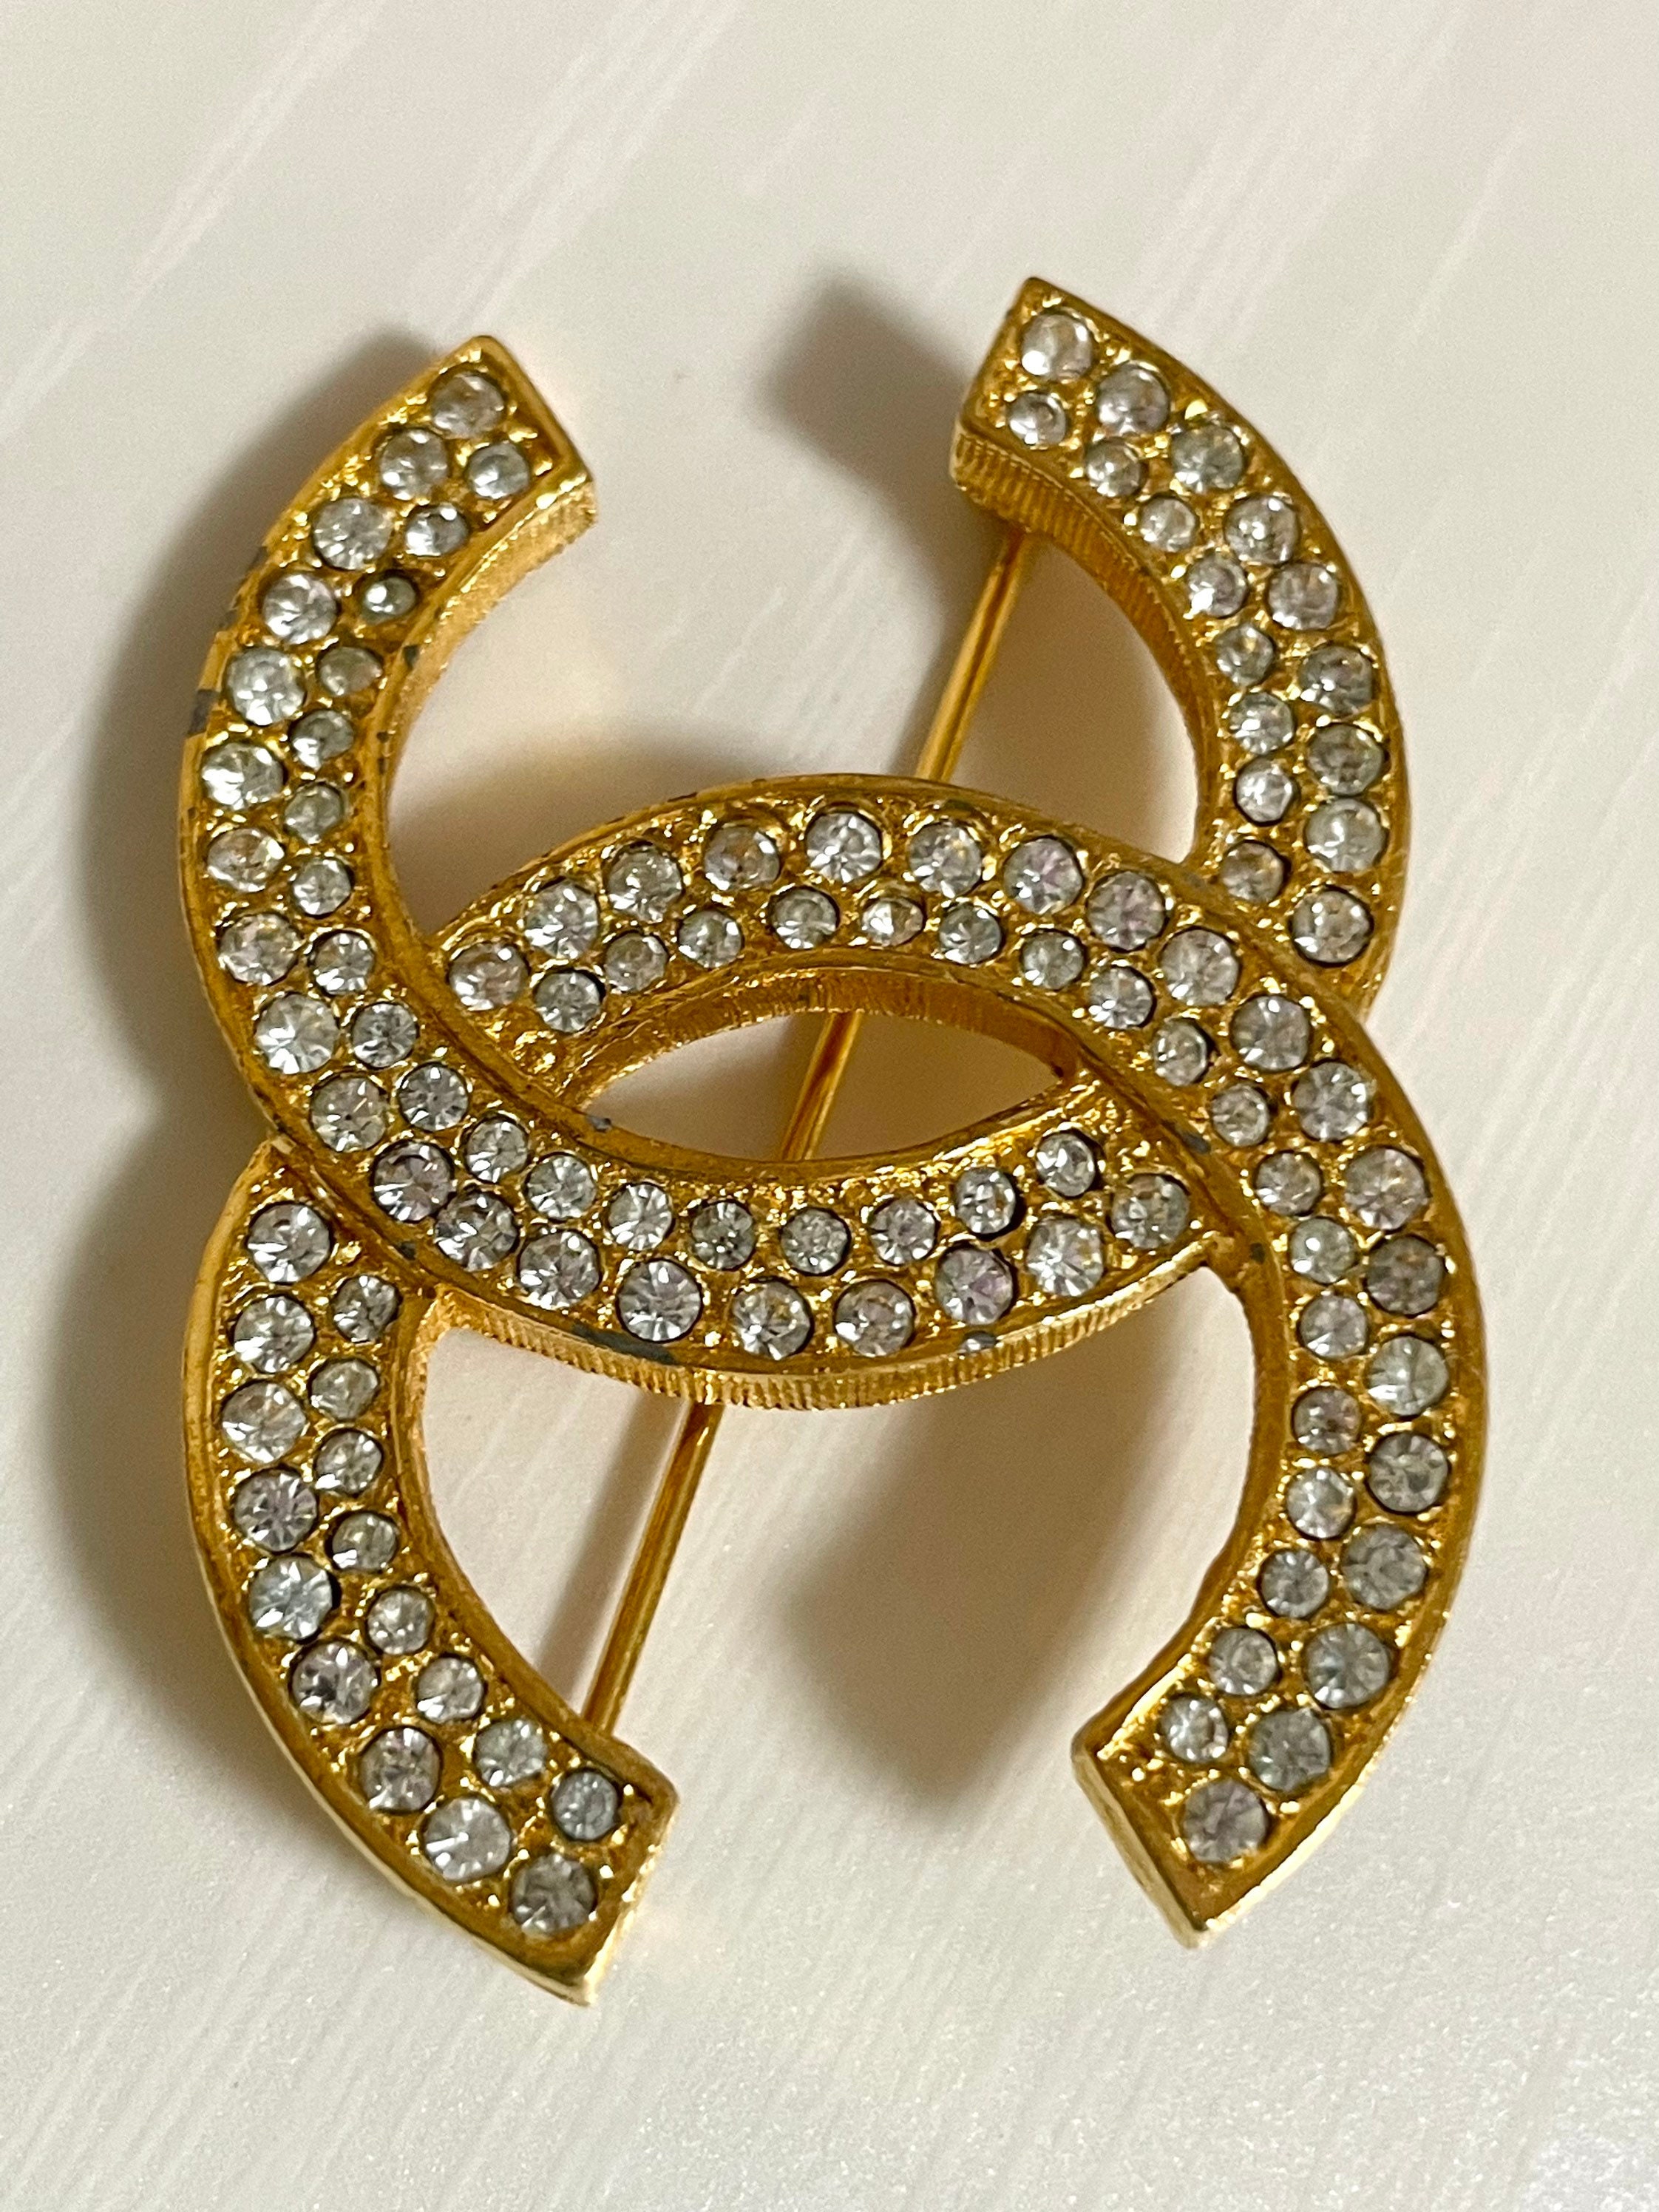 Buy W2 Vintage Chanel CC Brooch With Crystals. Must Have Classic